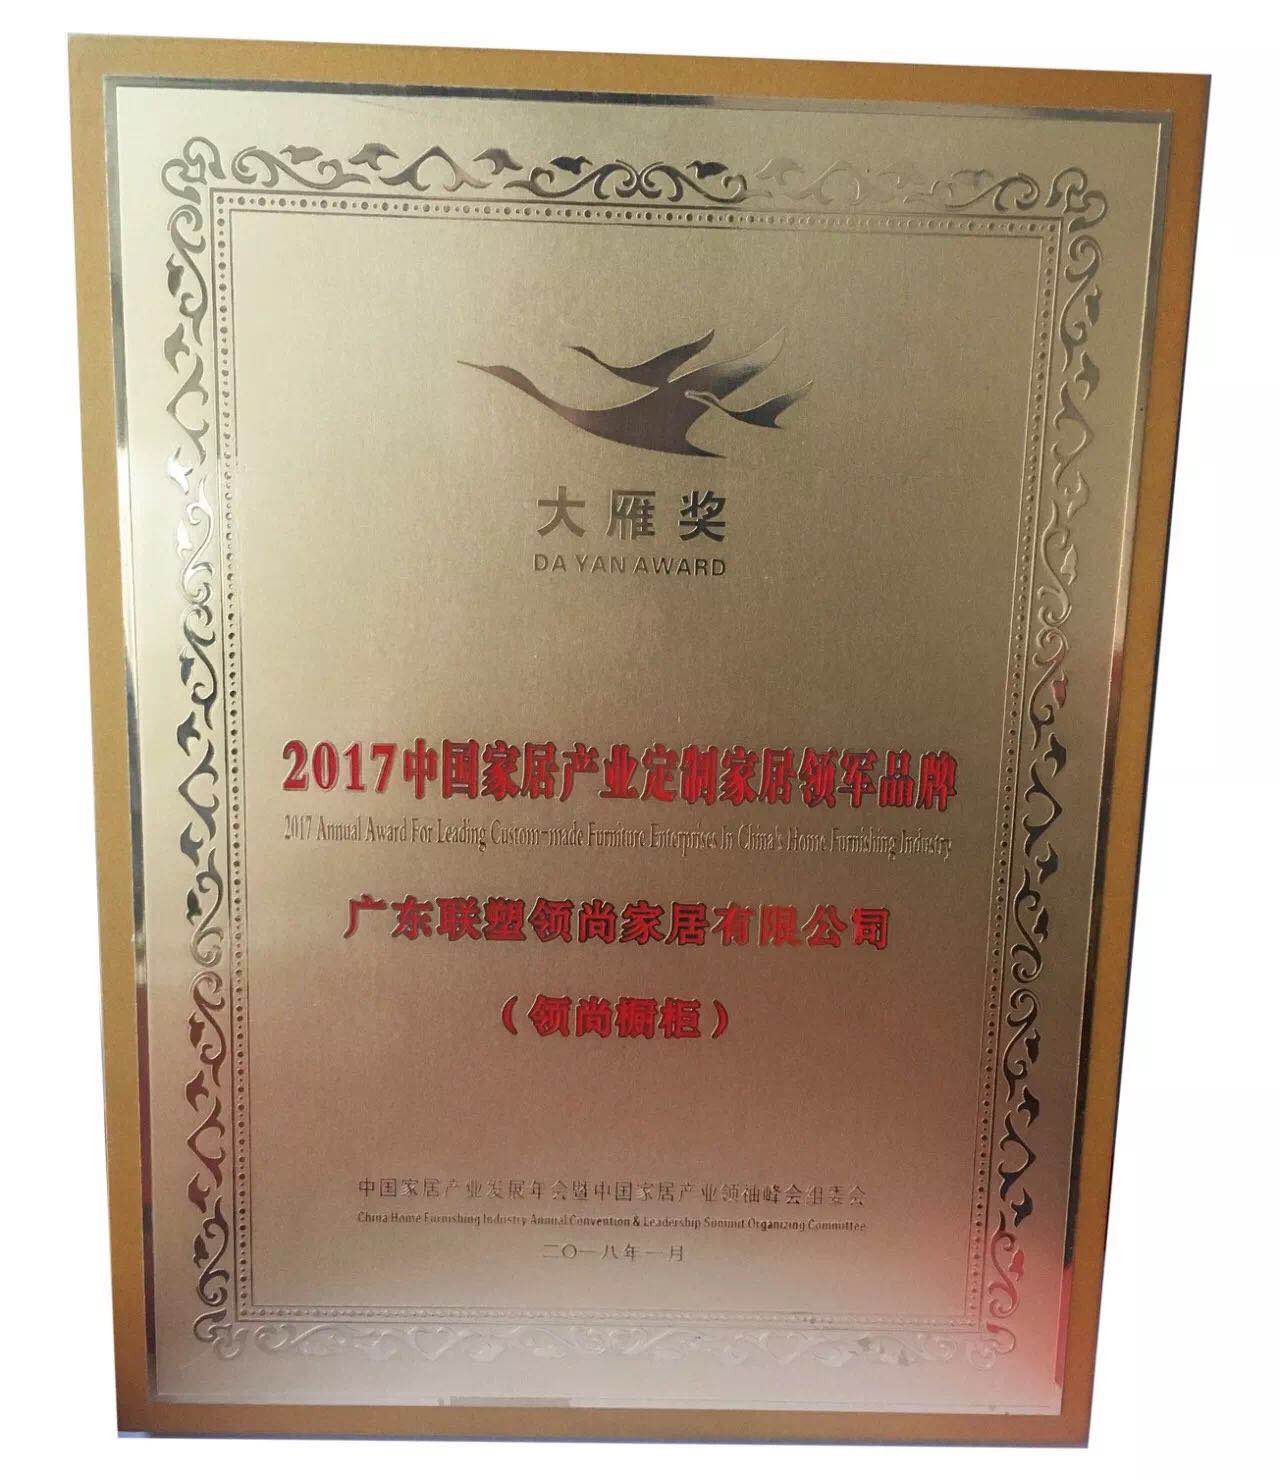 Lesso 2017 Annual Award For Leading Custom-made Furniture Enterprise In China's Home Furnishing Industry